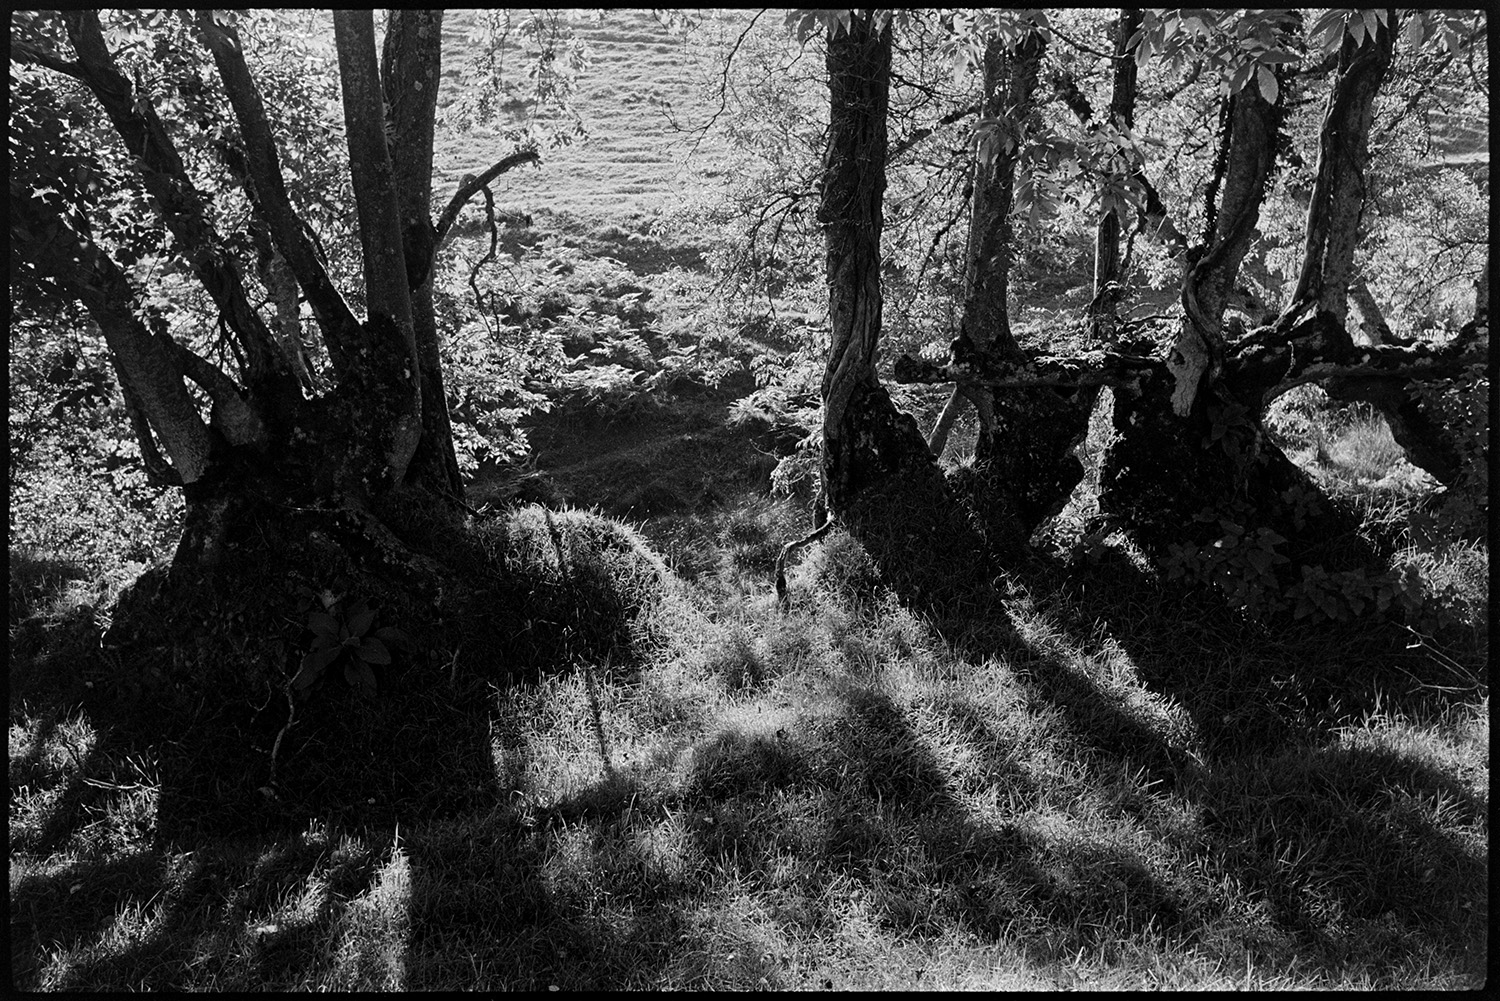 Sunlit river and trees. 
[A view of tree trunks silhouetted against the sun on Exmoor. Shadows are falling across the grass in the foreground.]